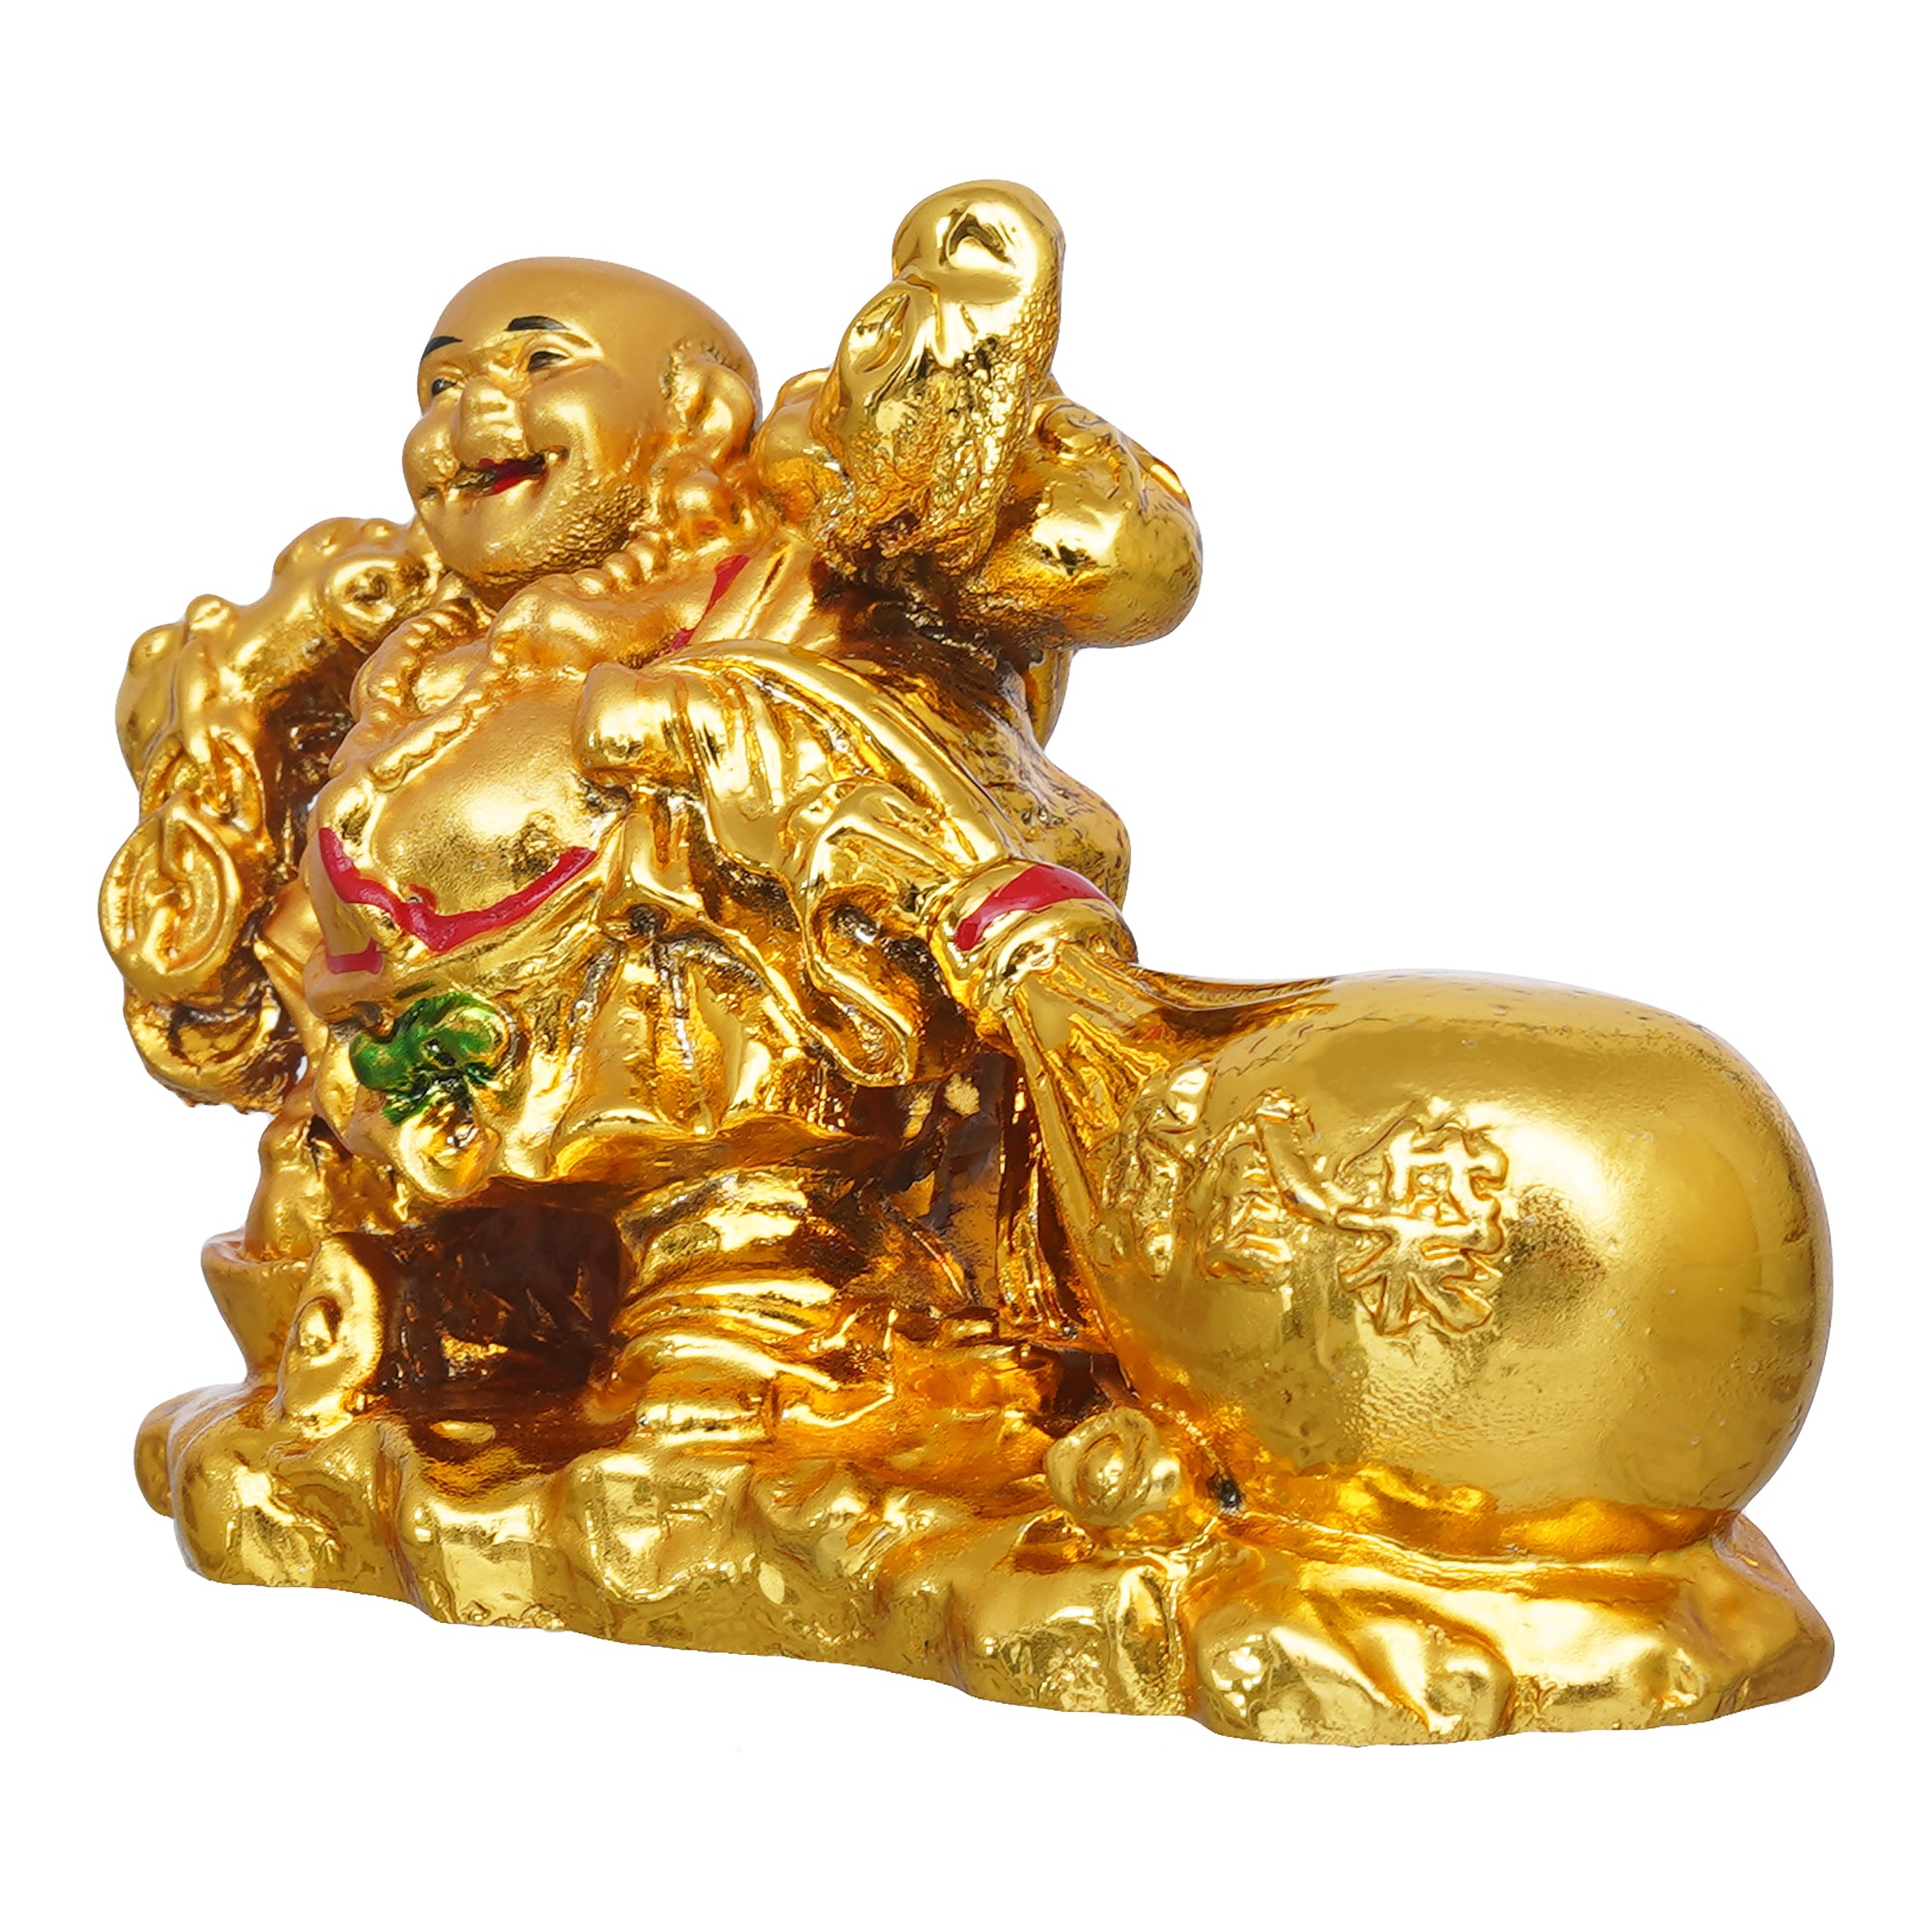 eCraftIndia Golden Polyresin Feng Shui Laughing Buddha Idol with Money Bag For Wealth And Good Luck 7